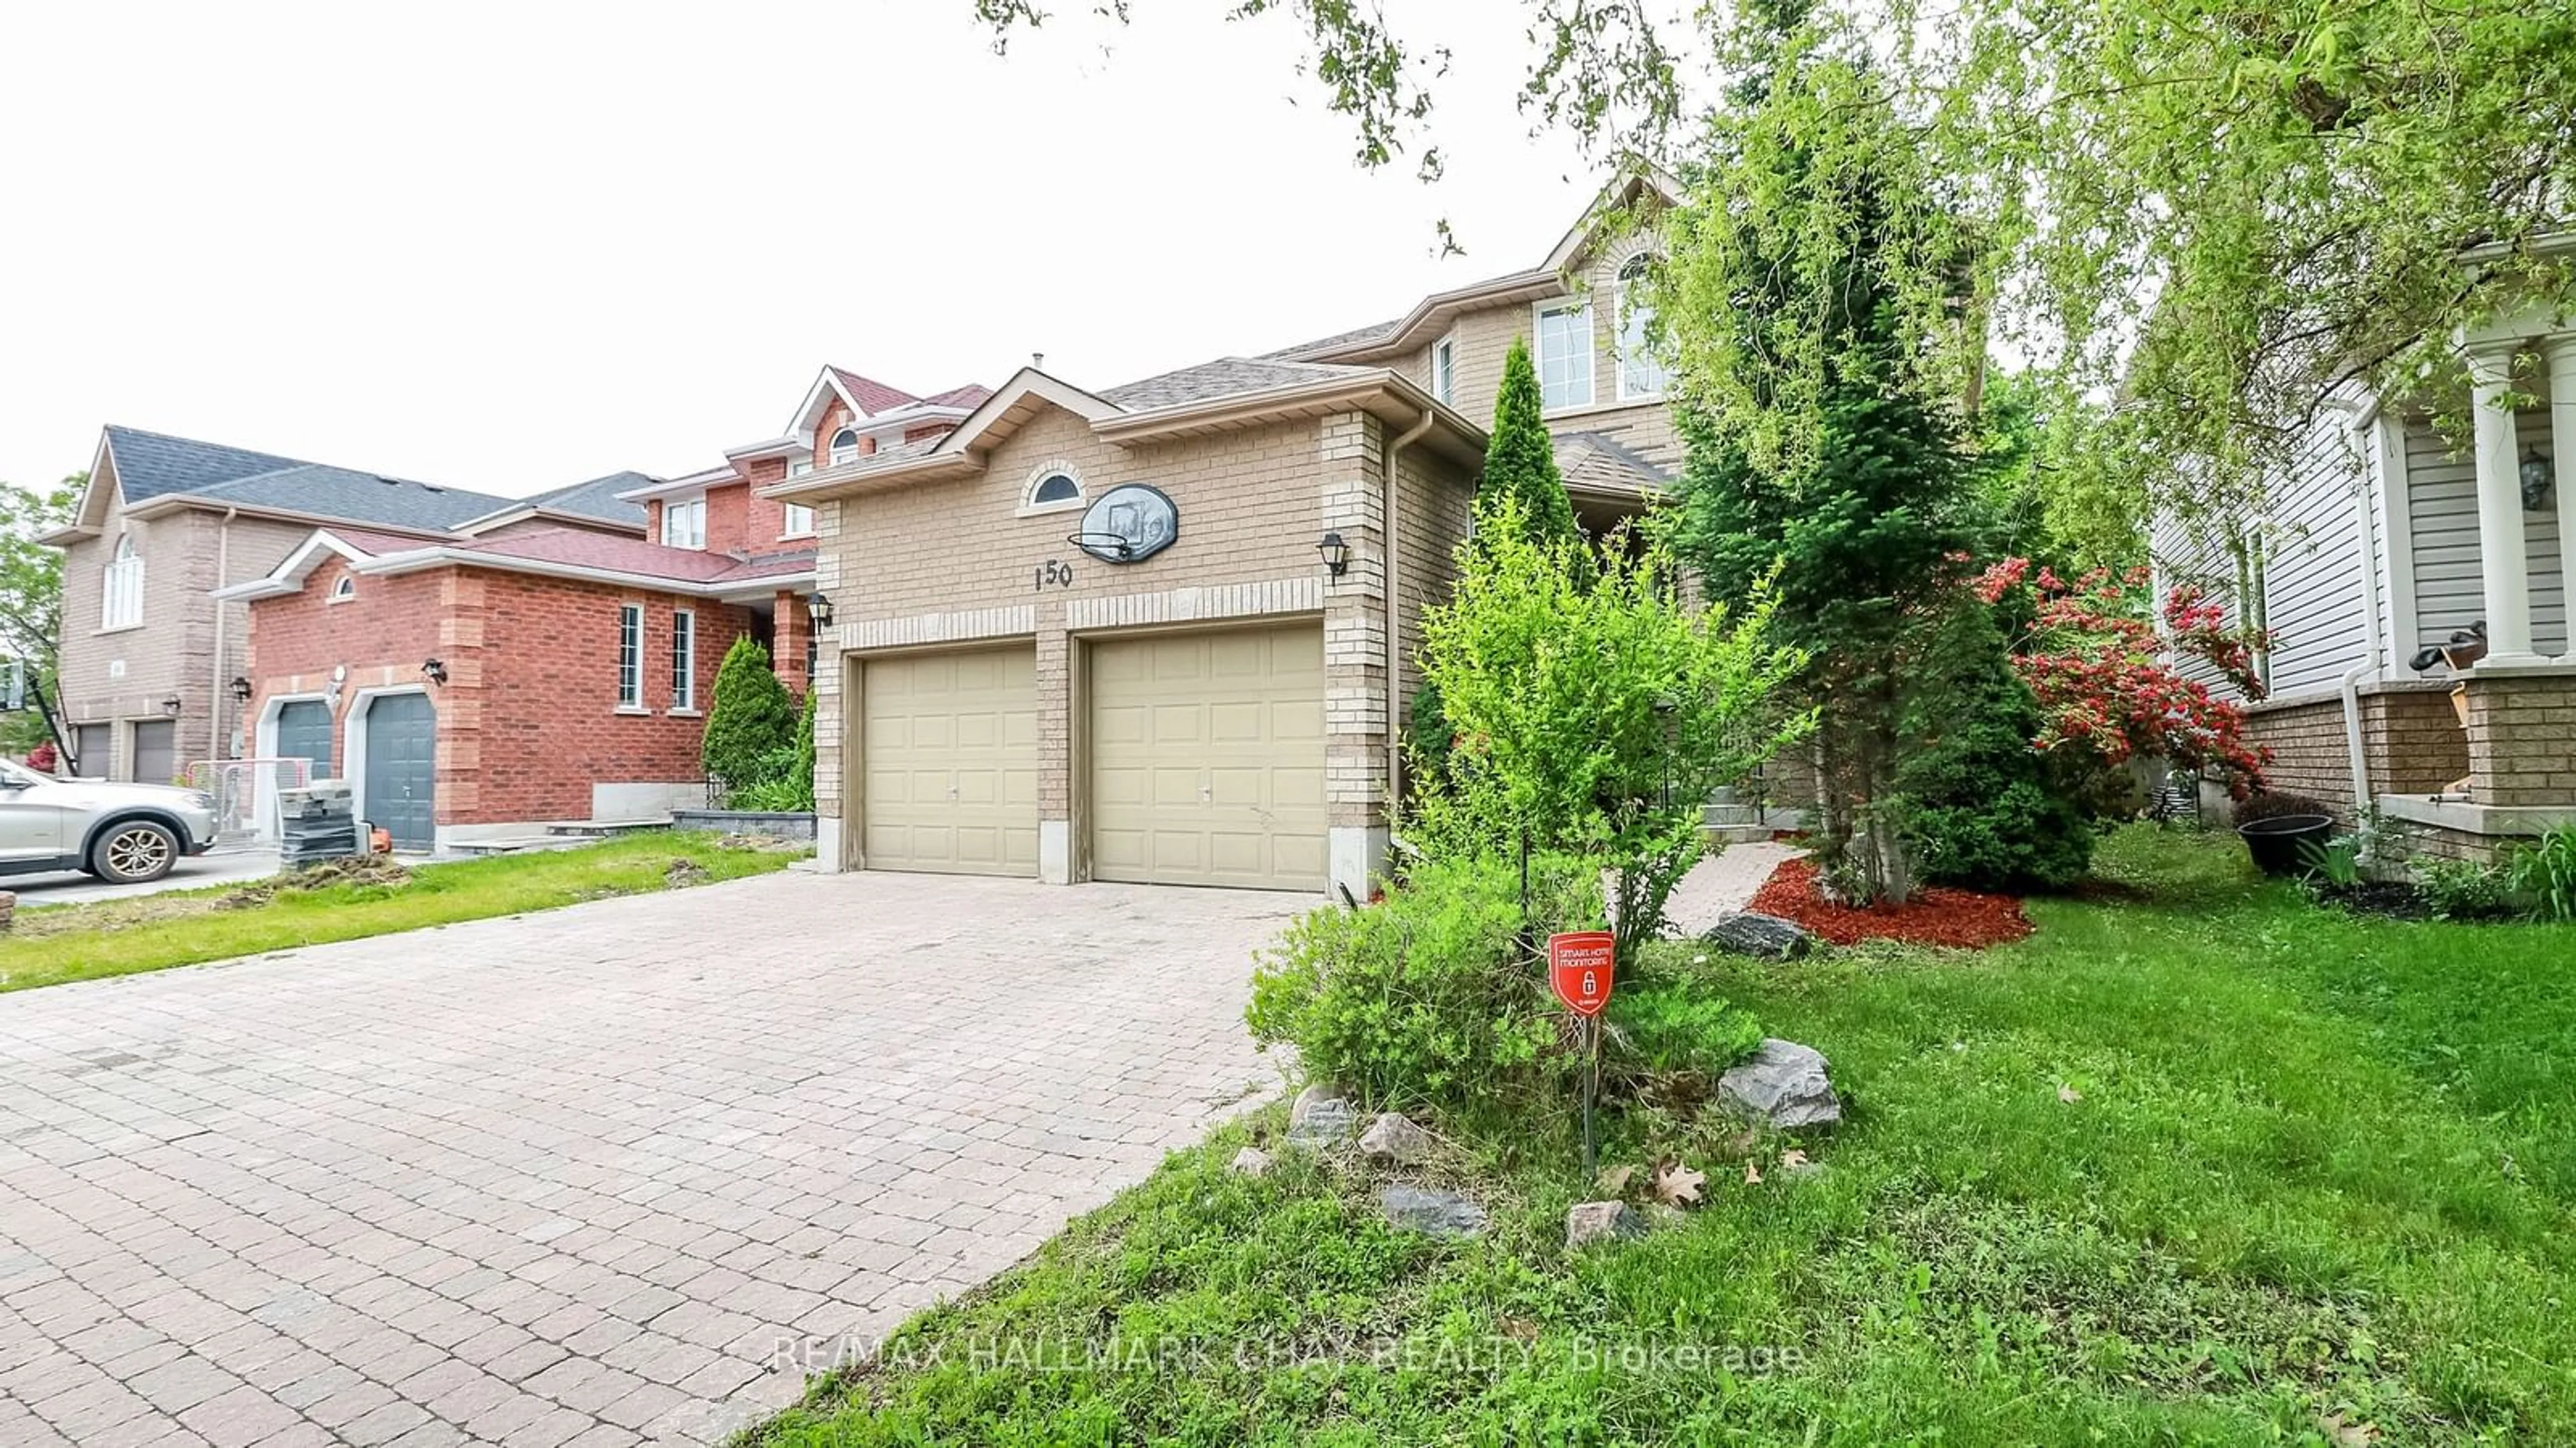 Home with brick exterior material for 150 Birkhall Pl, Barrie Ontario L4N 0K8